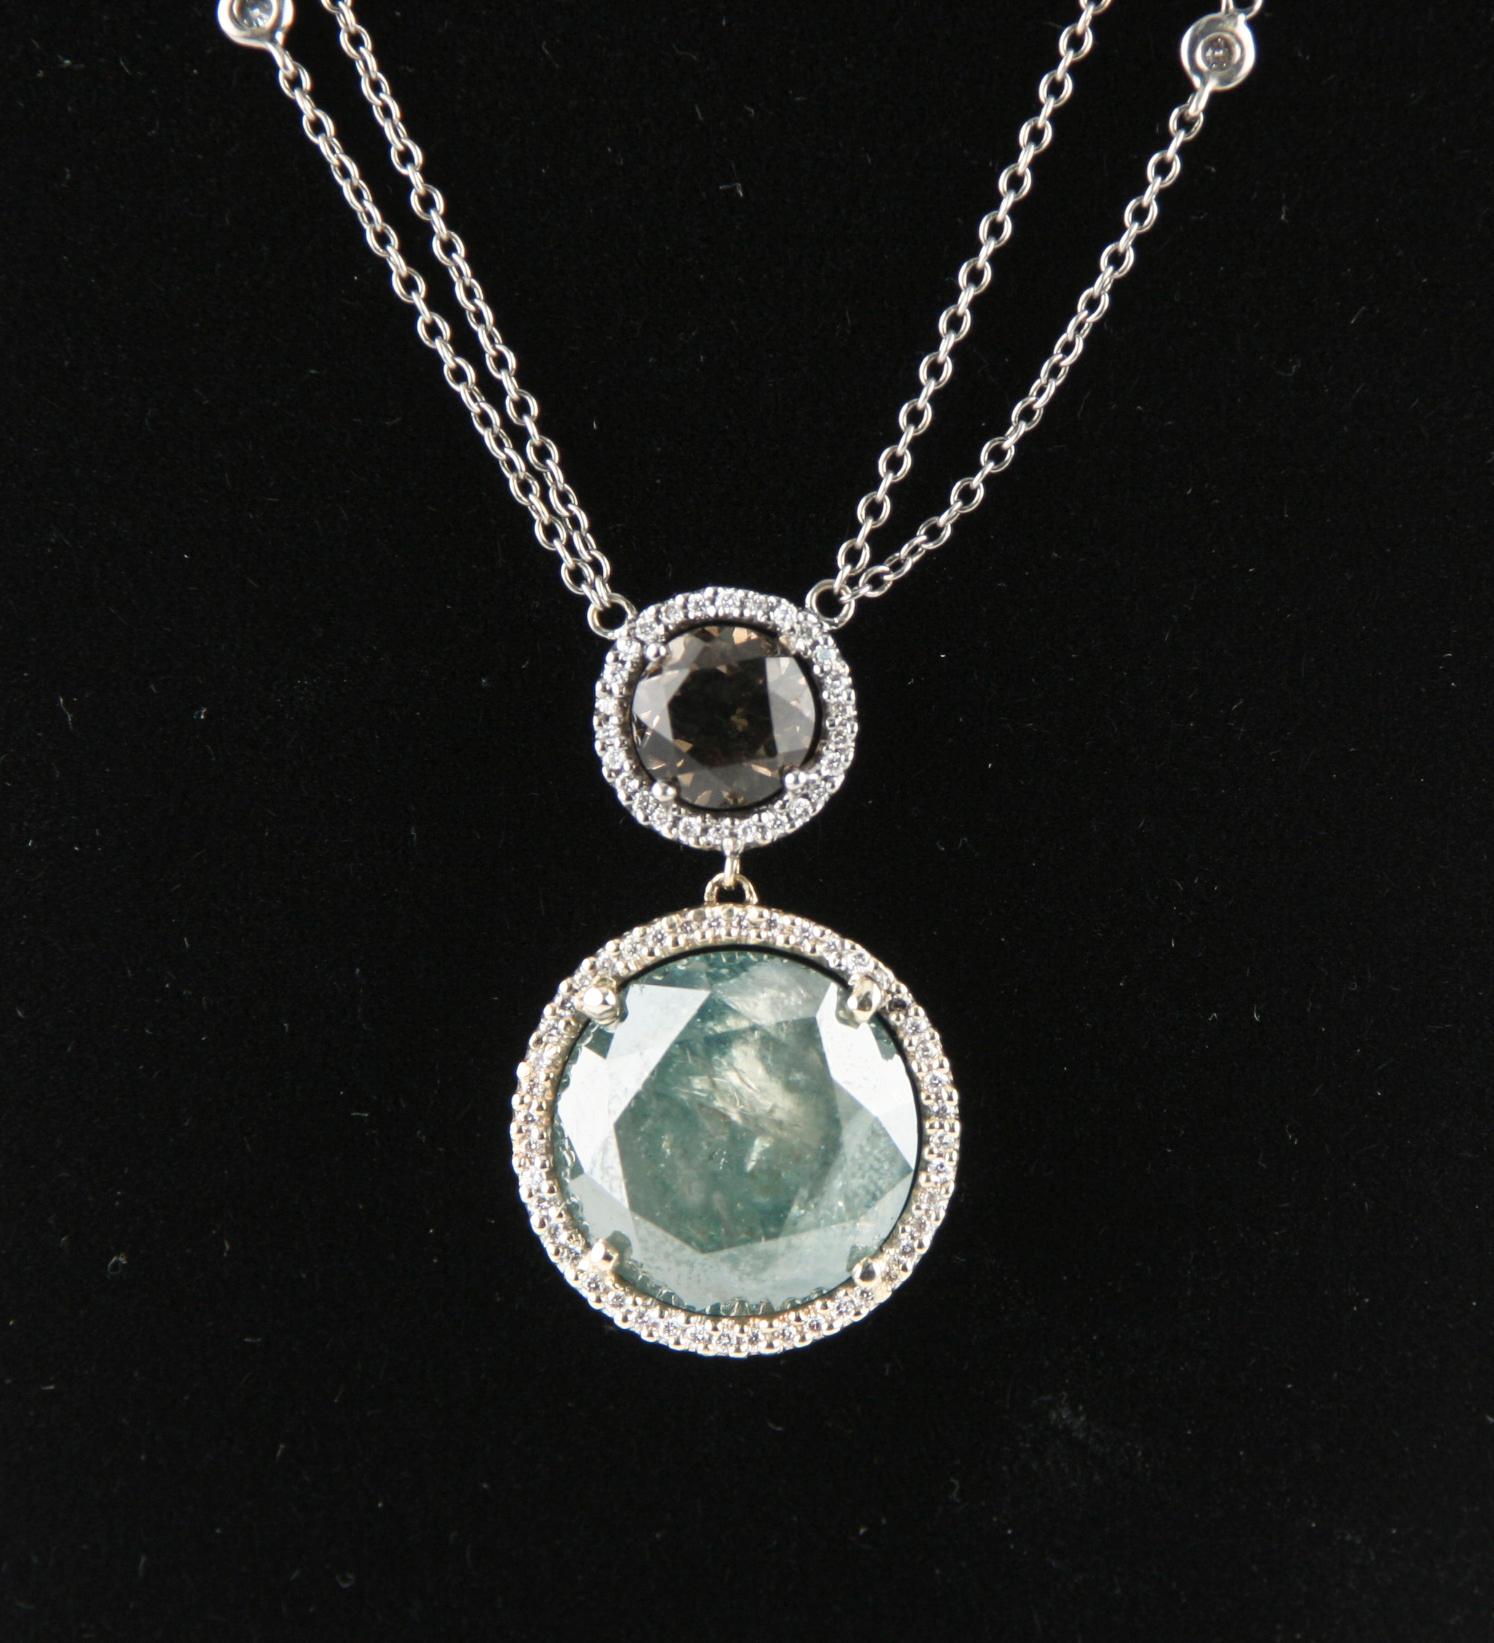 Amazing, Unique Diamond Solitaire Pendant
Features 11.46 carat Round Cut Solitaire Diamond Set in Diamond Bezel
Approximately 14 mm in Diameter
Heavily Included Center Stone Has Unique Blue-Green Color with Opalescent Accents
Light Brown Diamond set